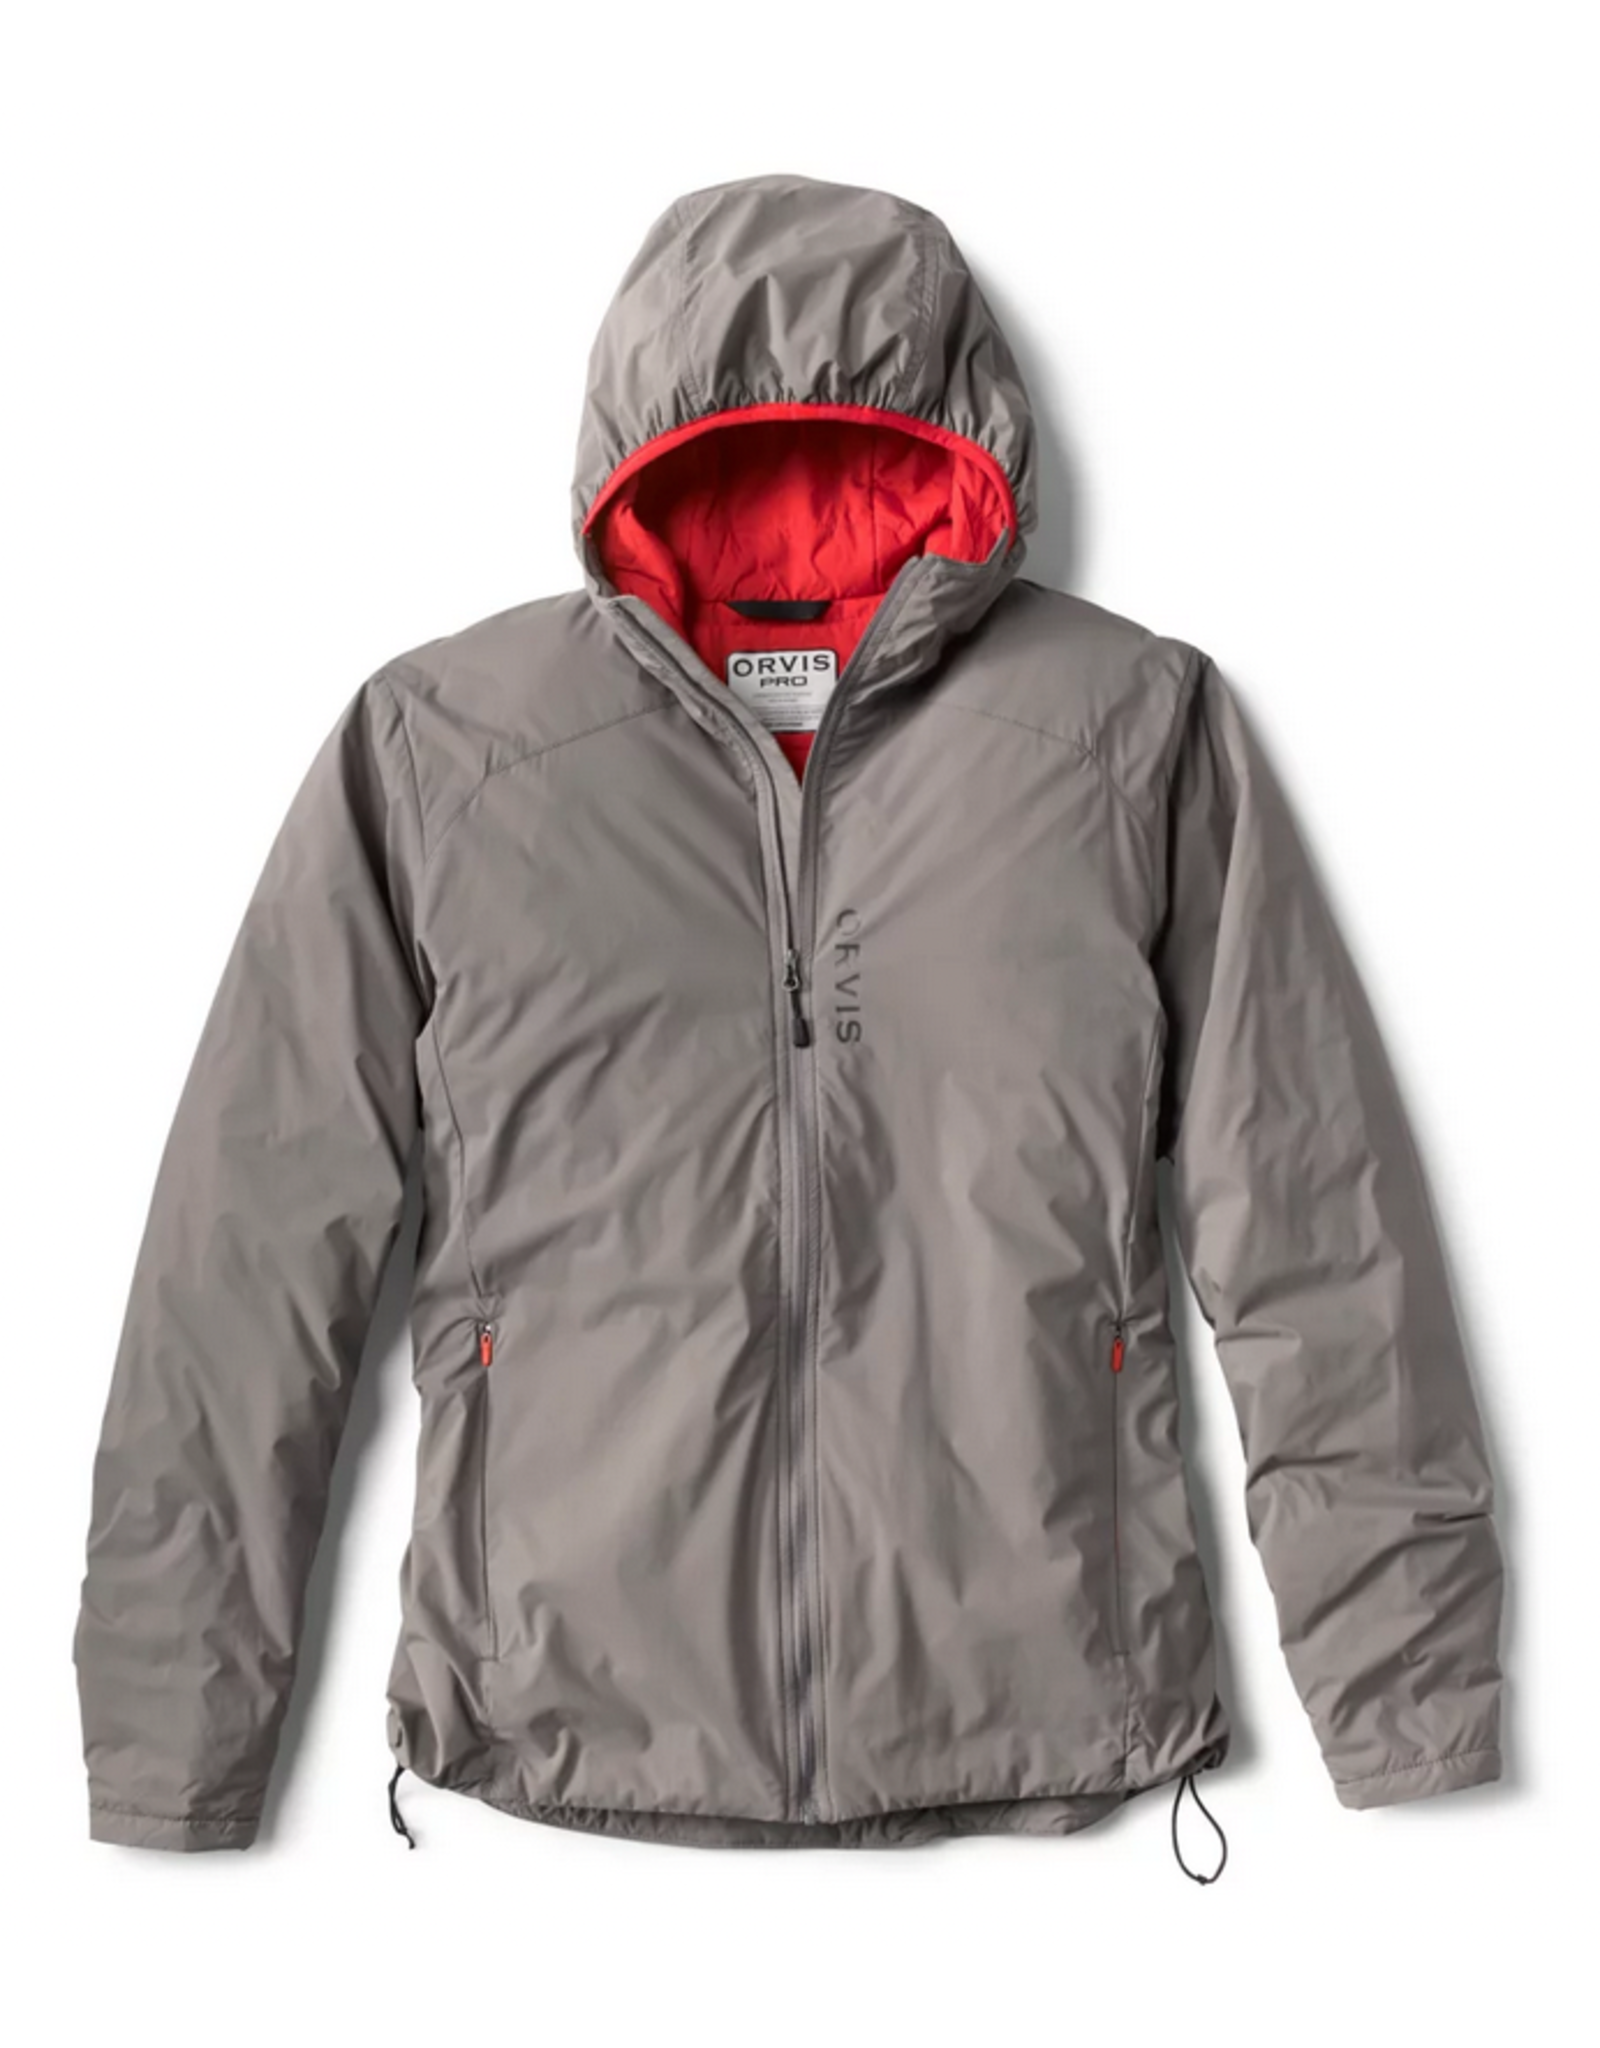 Orvis ORVIS Pro LT Insulated Hoodie